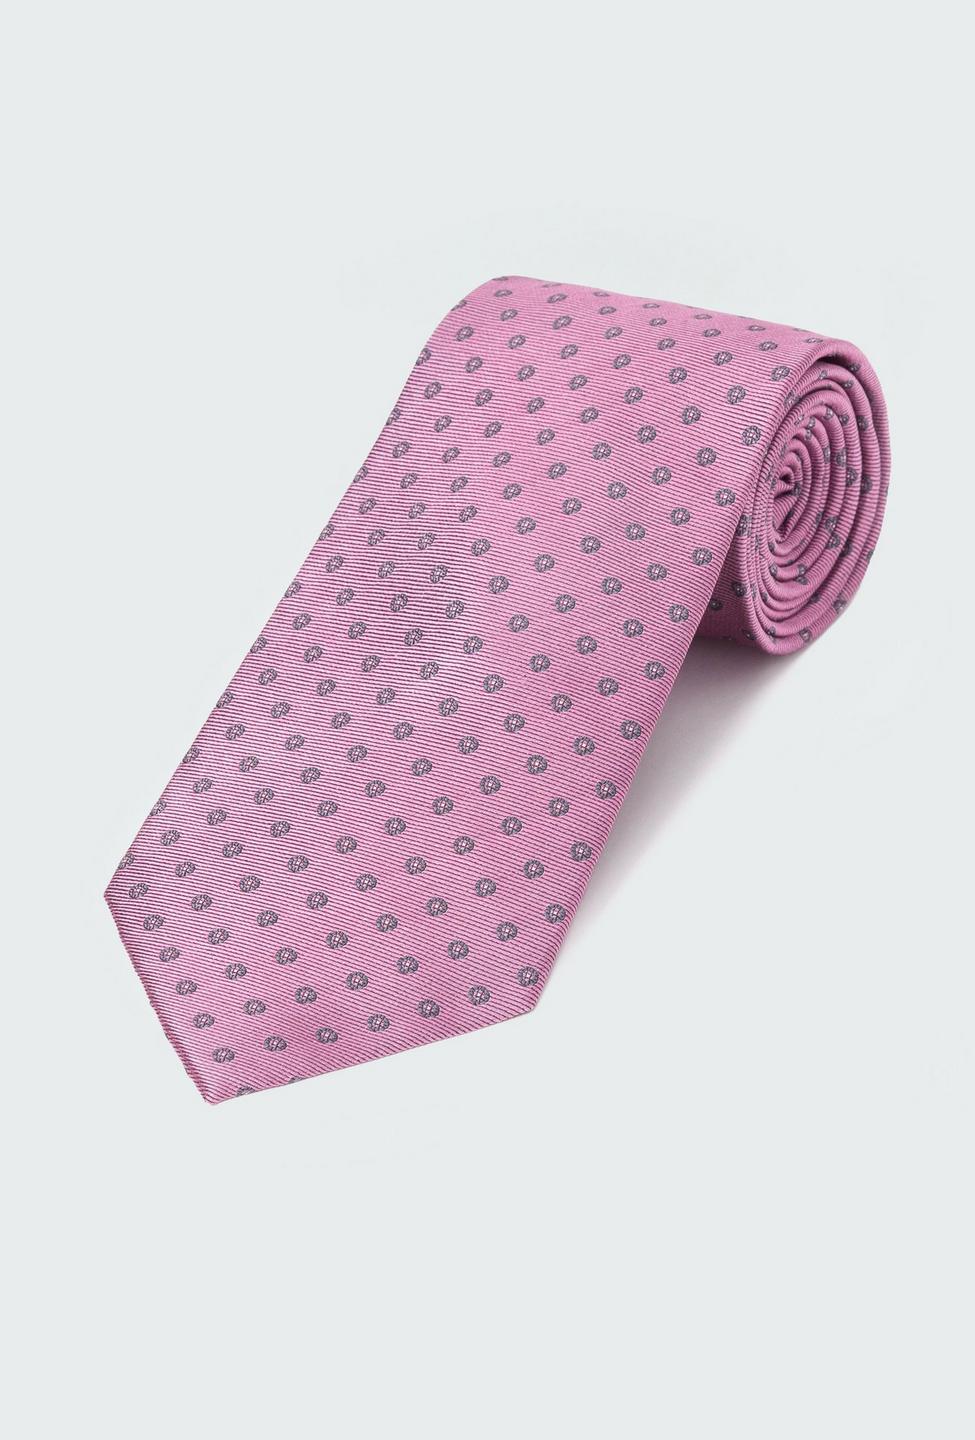 Pink tie - Pattern Design from Indochino Collection